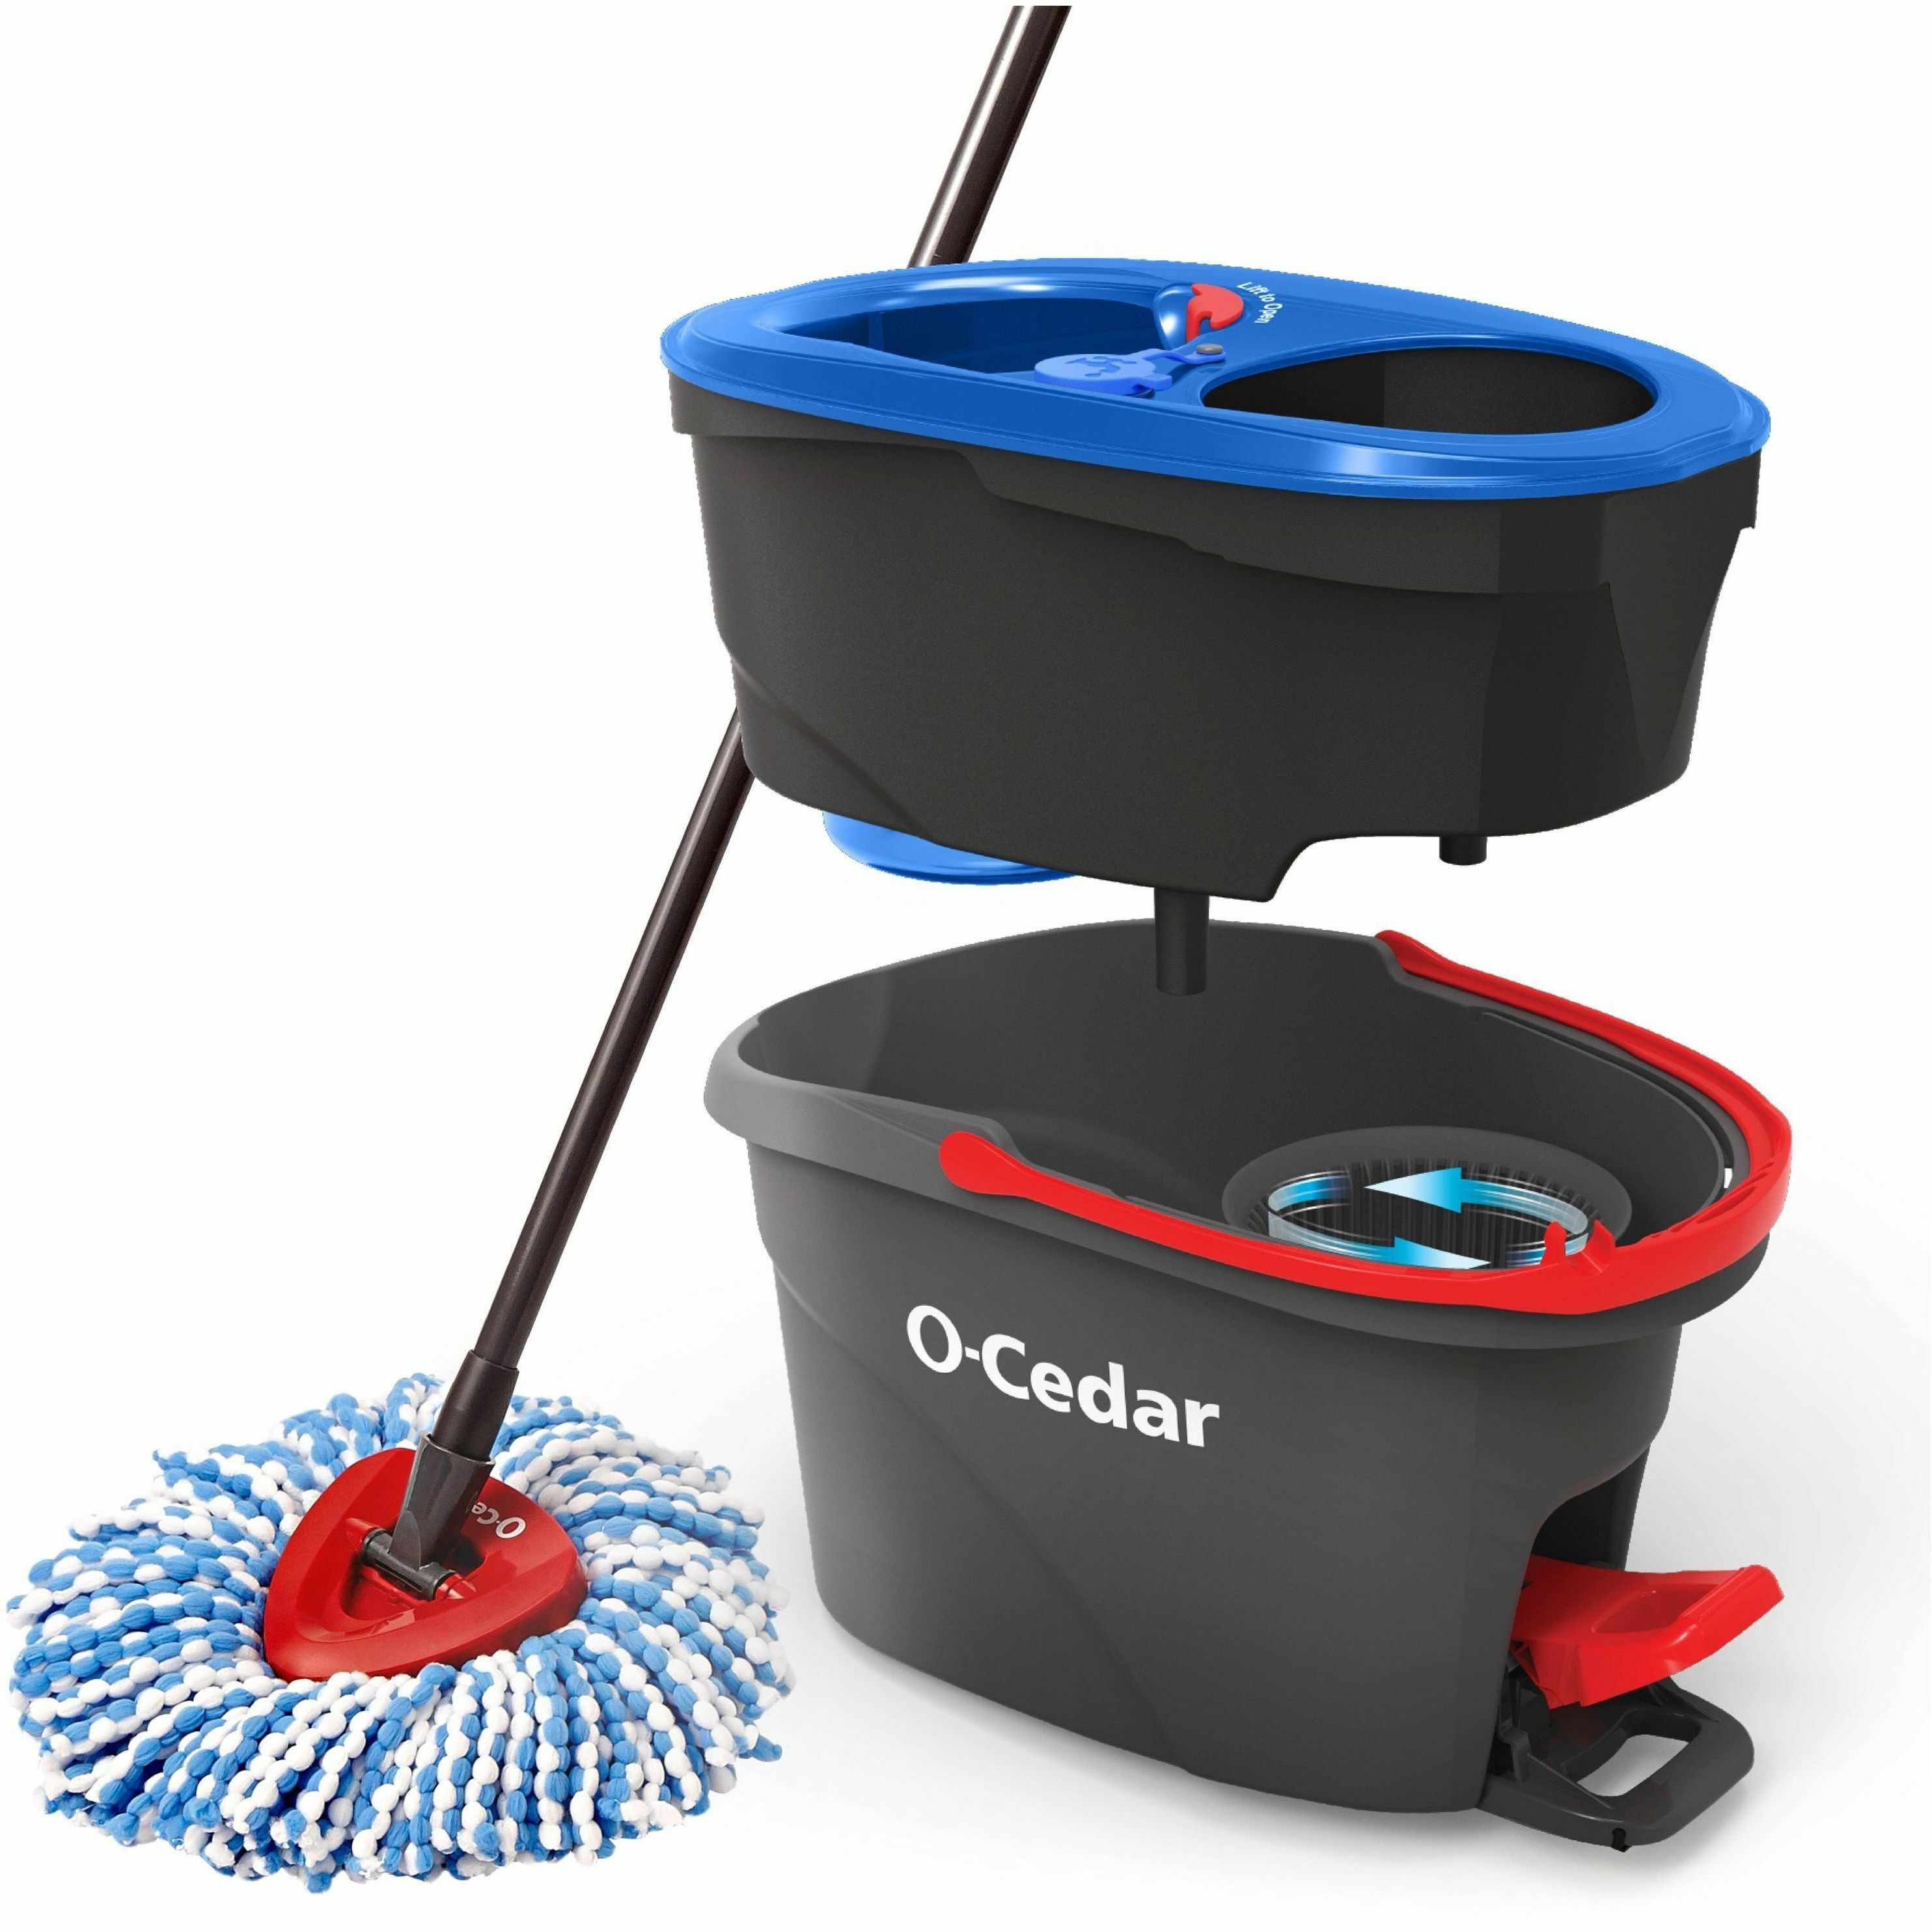 O-Cedar EasyWring RinseClean Microfiber Spin Mop System